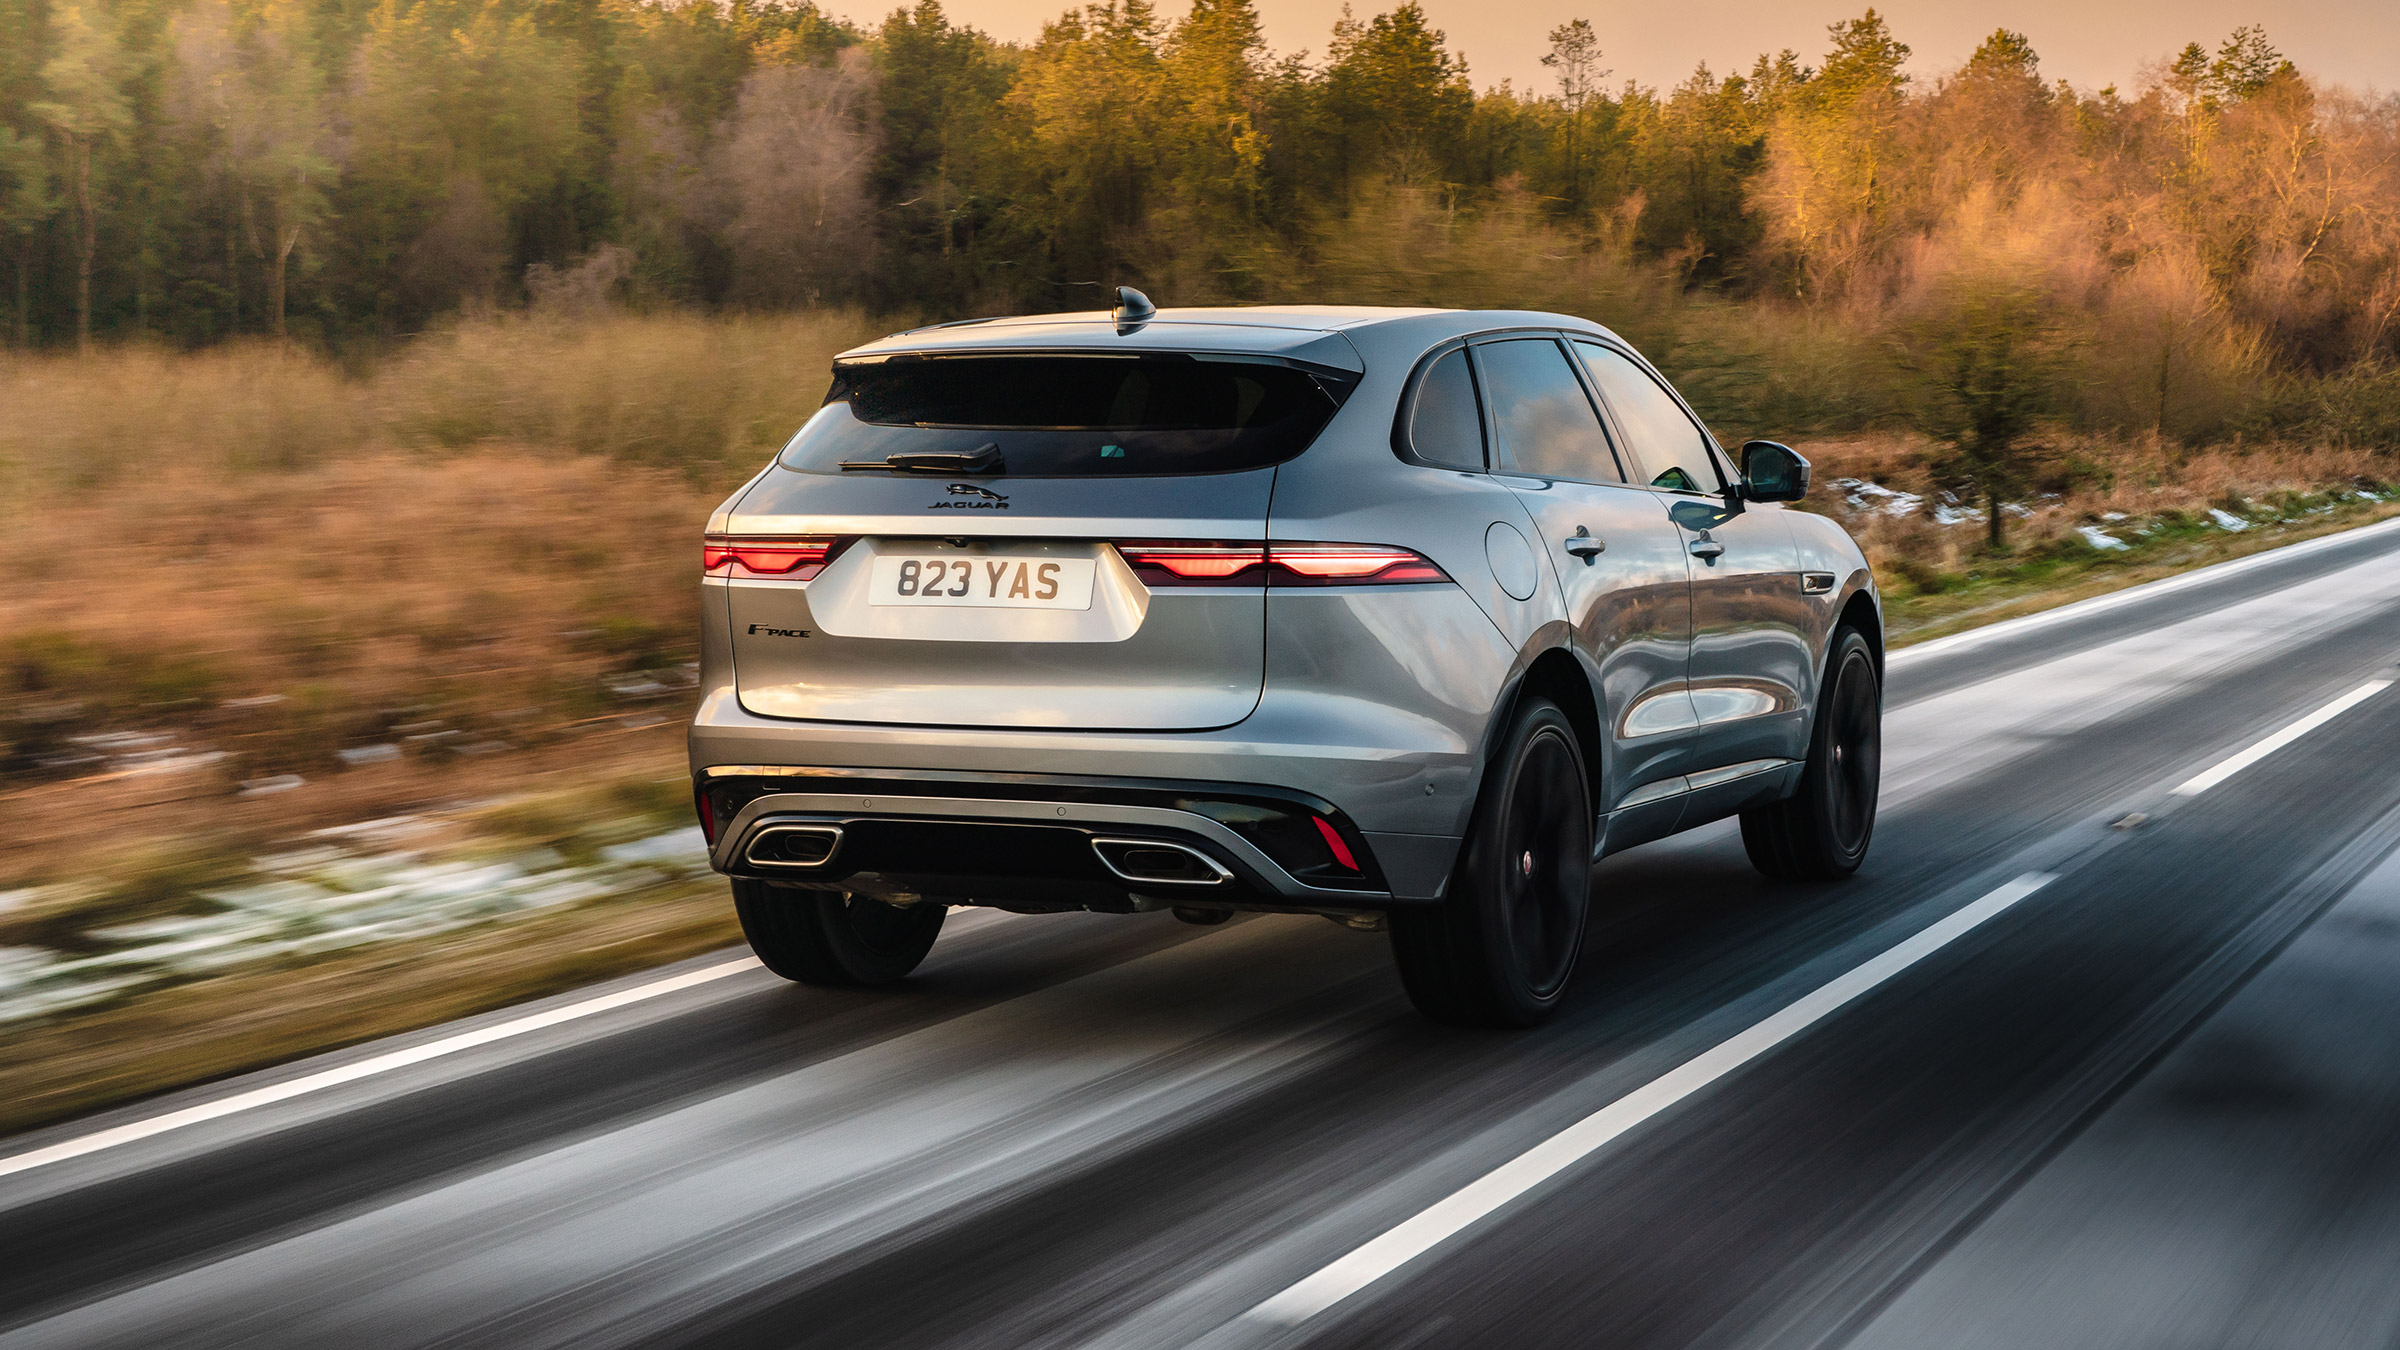 Jaguar F Pace P400 Hse 21 Review Popular Suv Refreshed But Can It Take On A Macan Evo